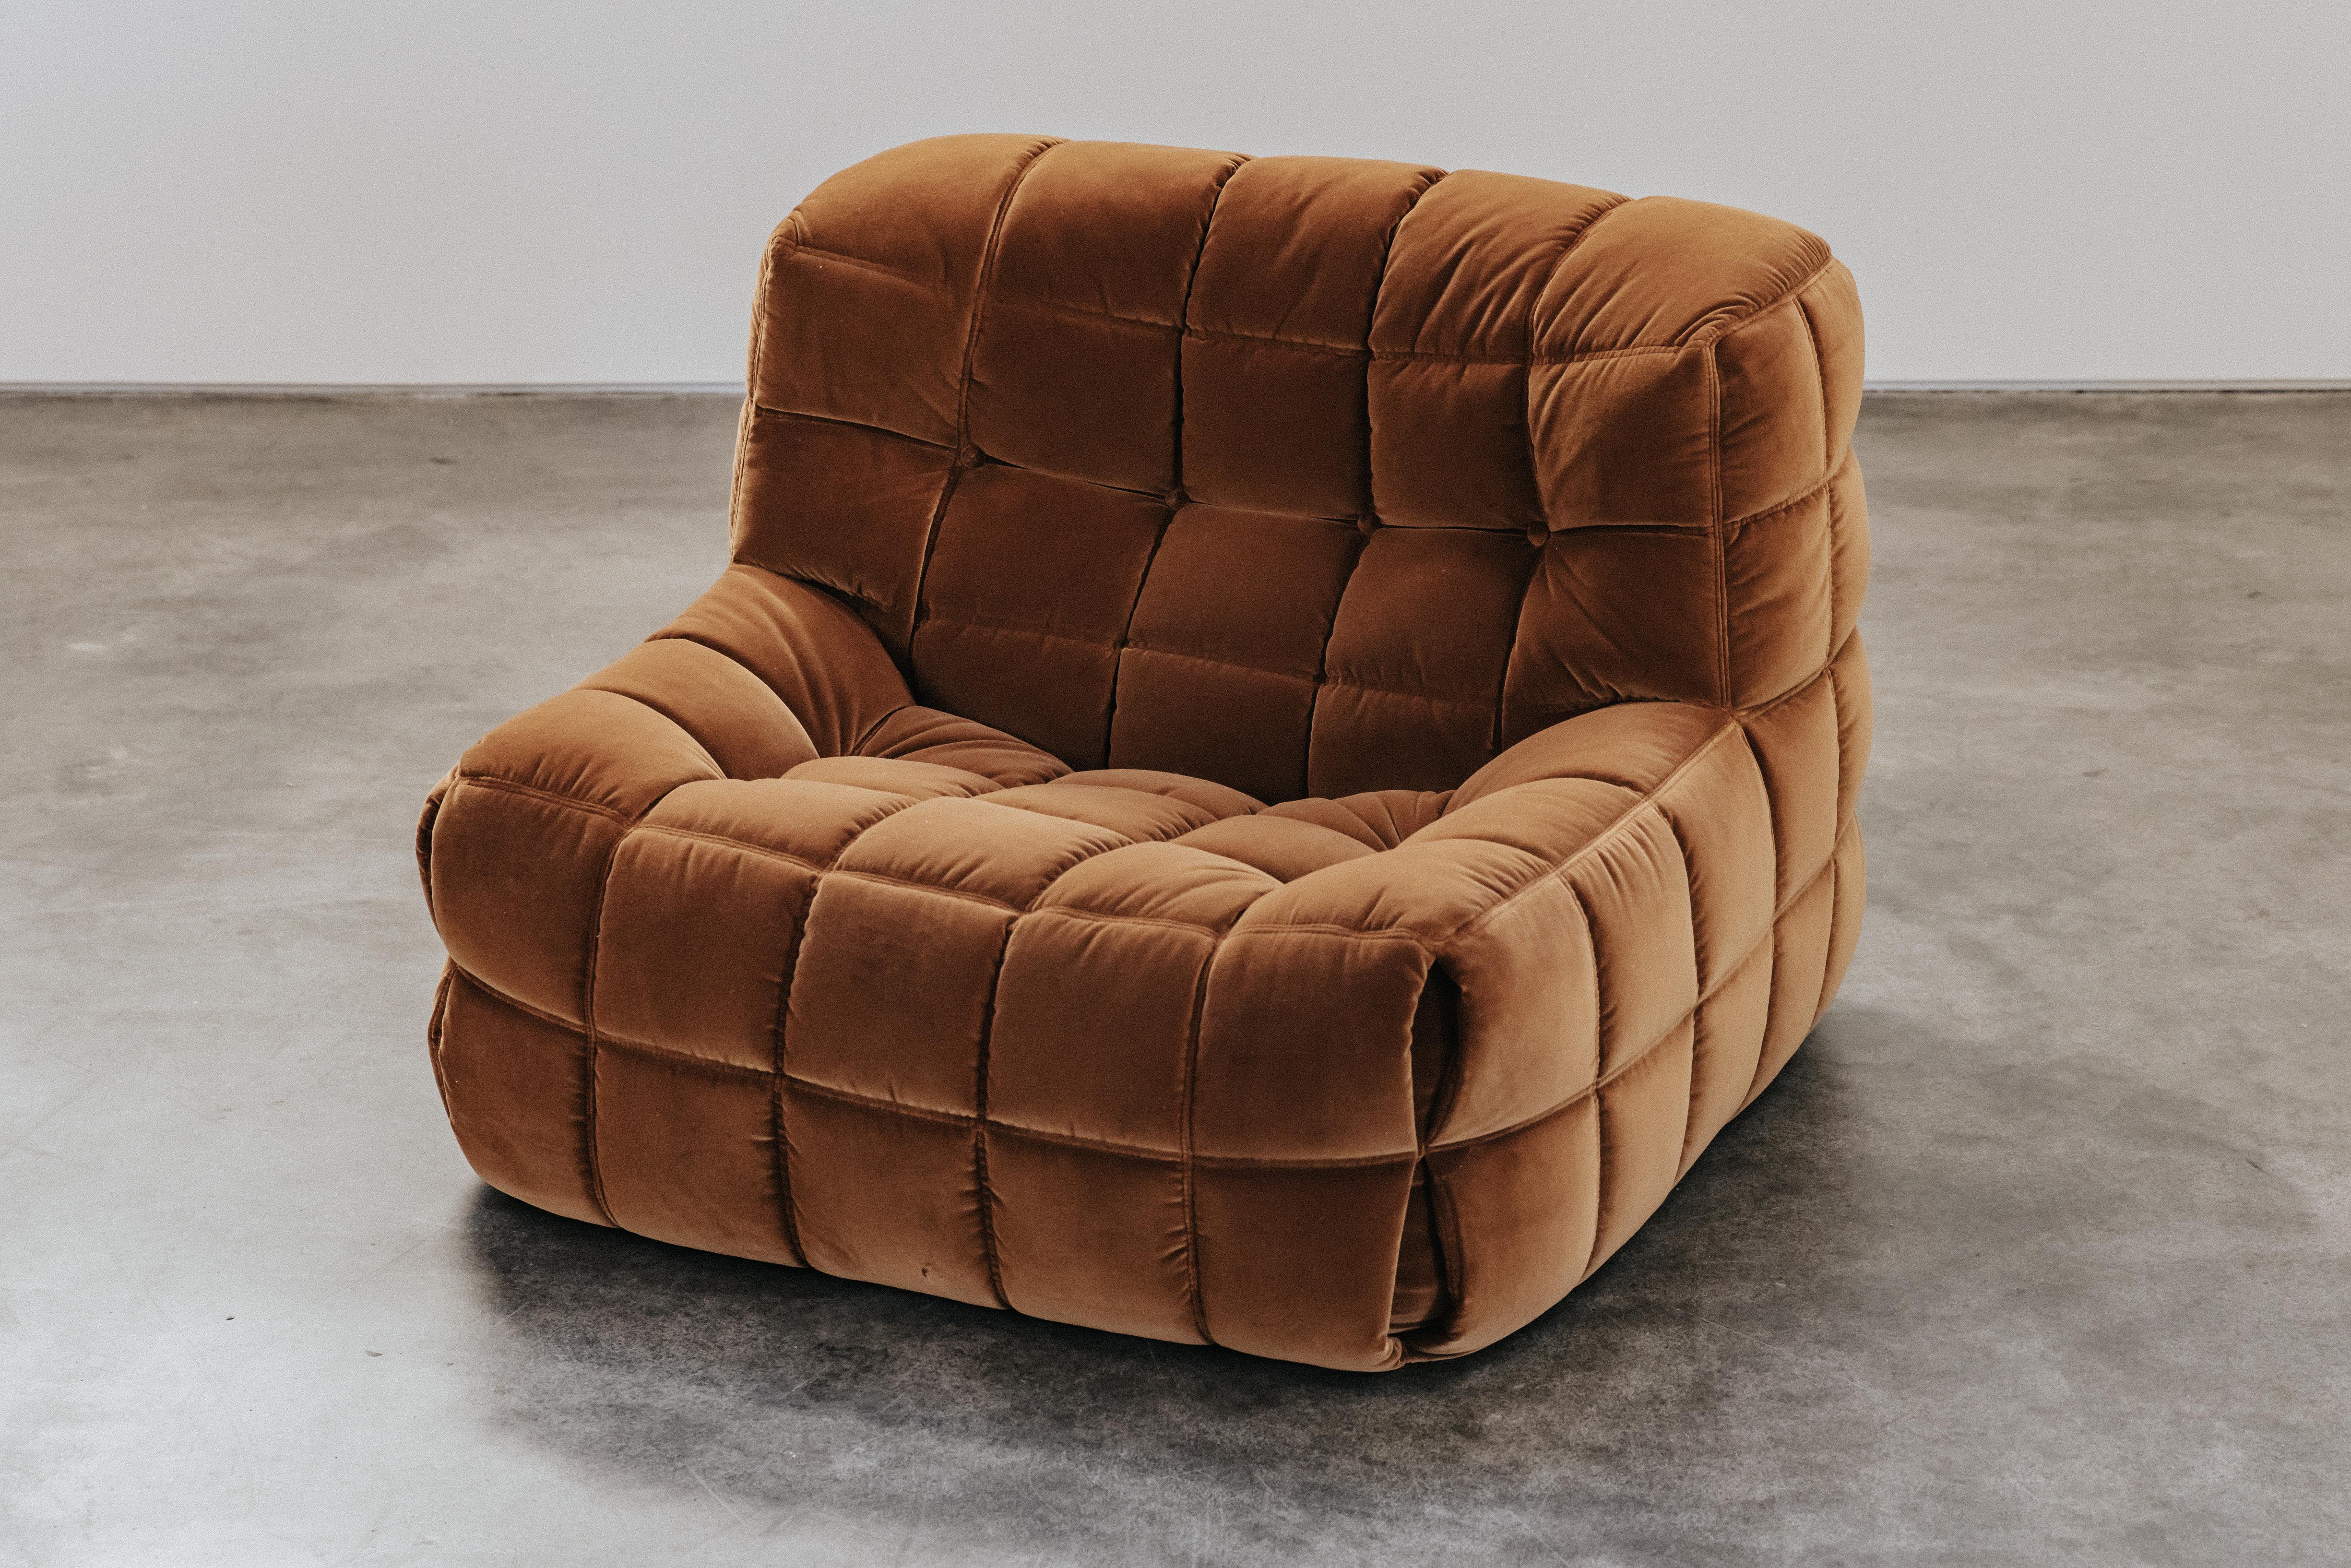 Vintage Kashima Lounge Chair For Ligne Roset, France 1970s.  Very comfortable model, later upholstered in a copper colored velvet.  Excellent condition.